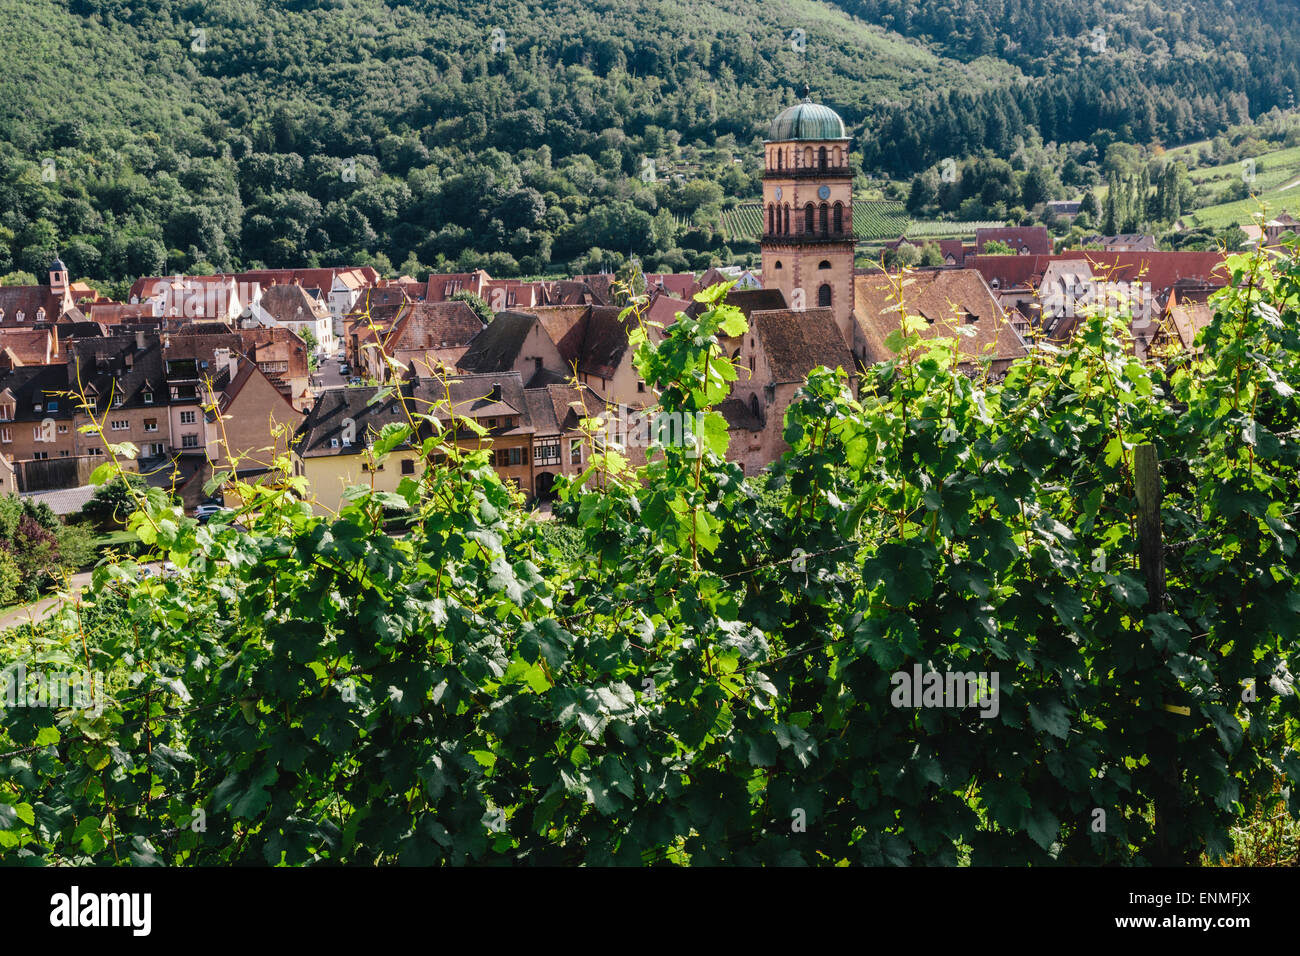 Vineyards above Kaysersberg, Alsace, France, looking over town Stock Photo